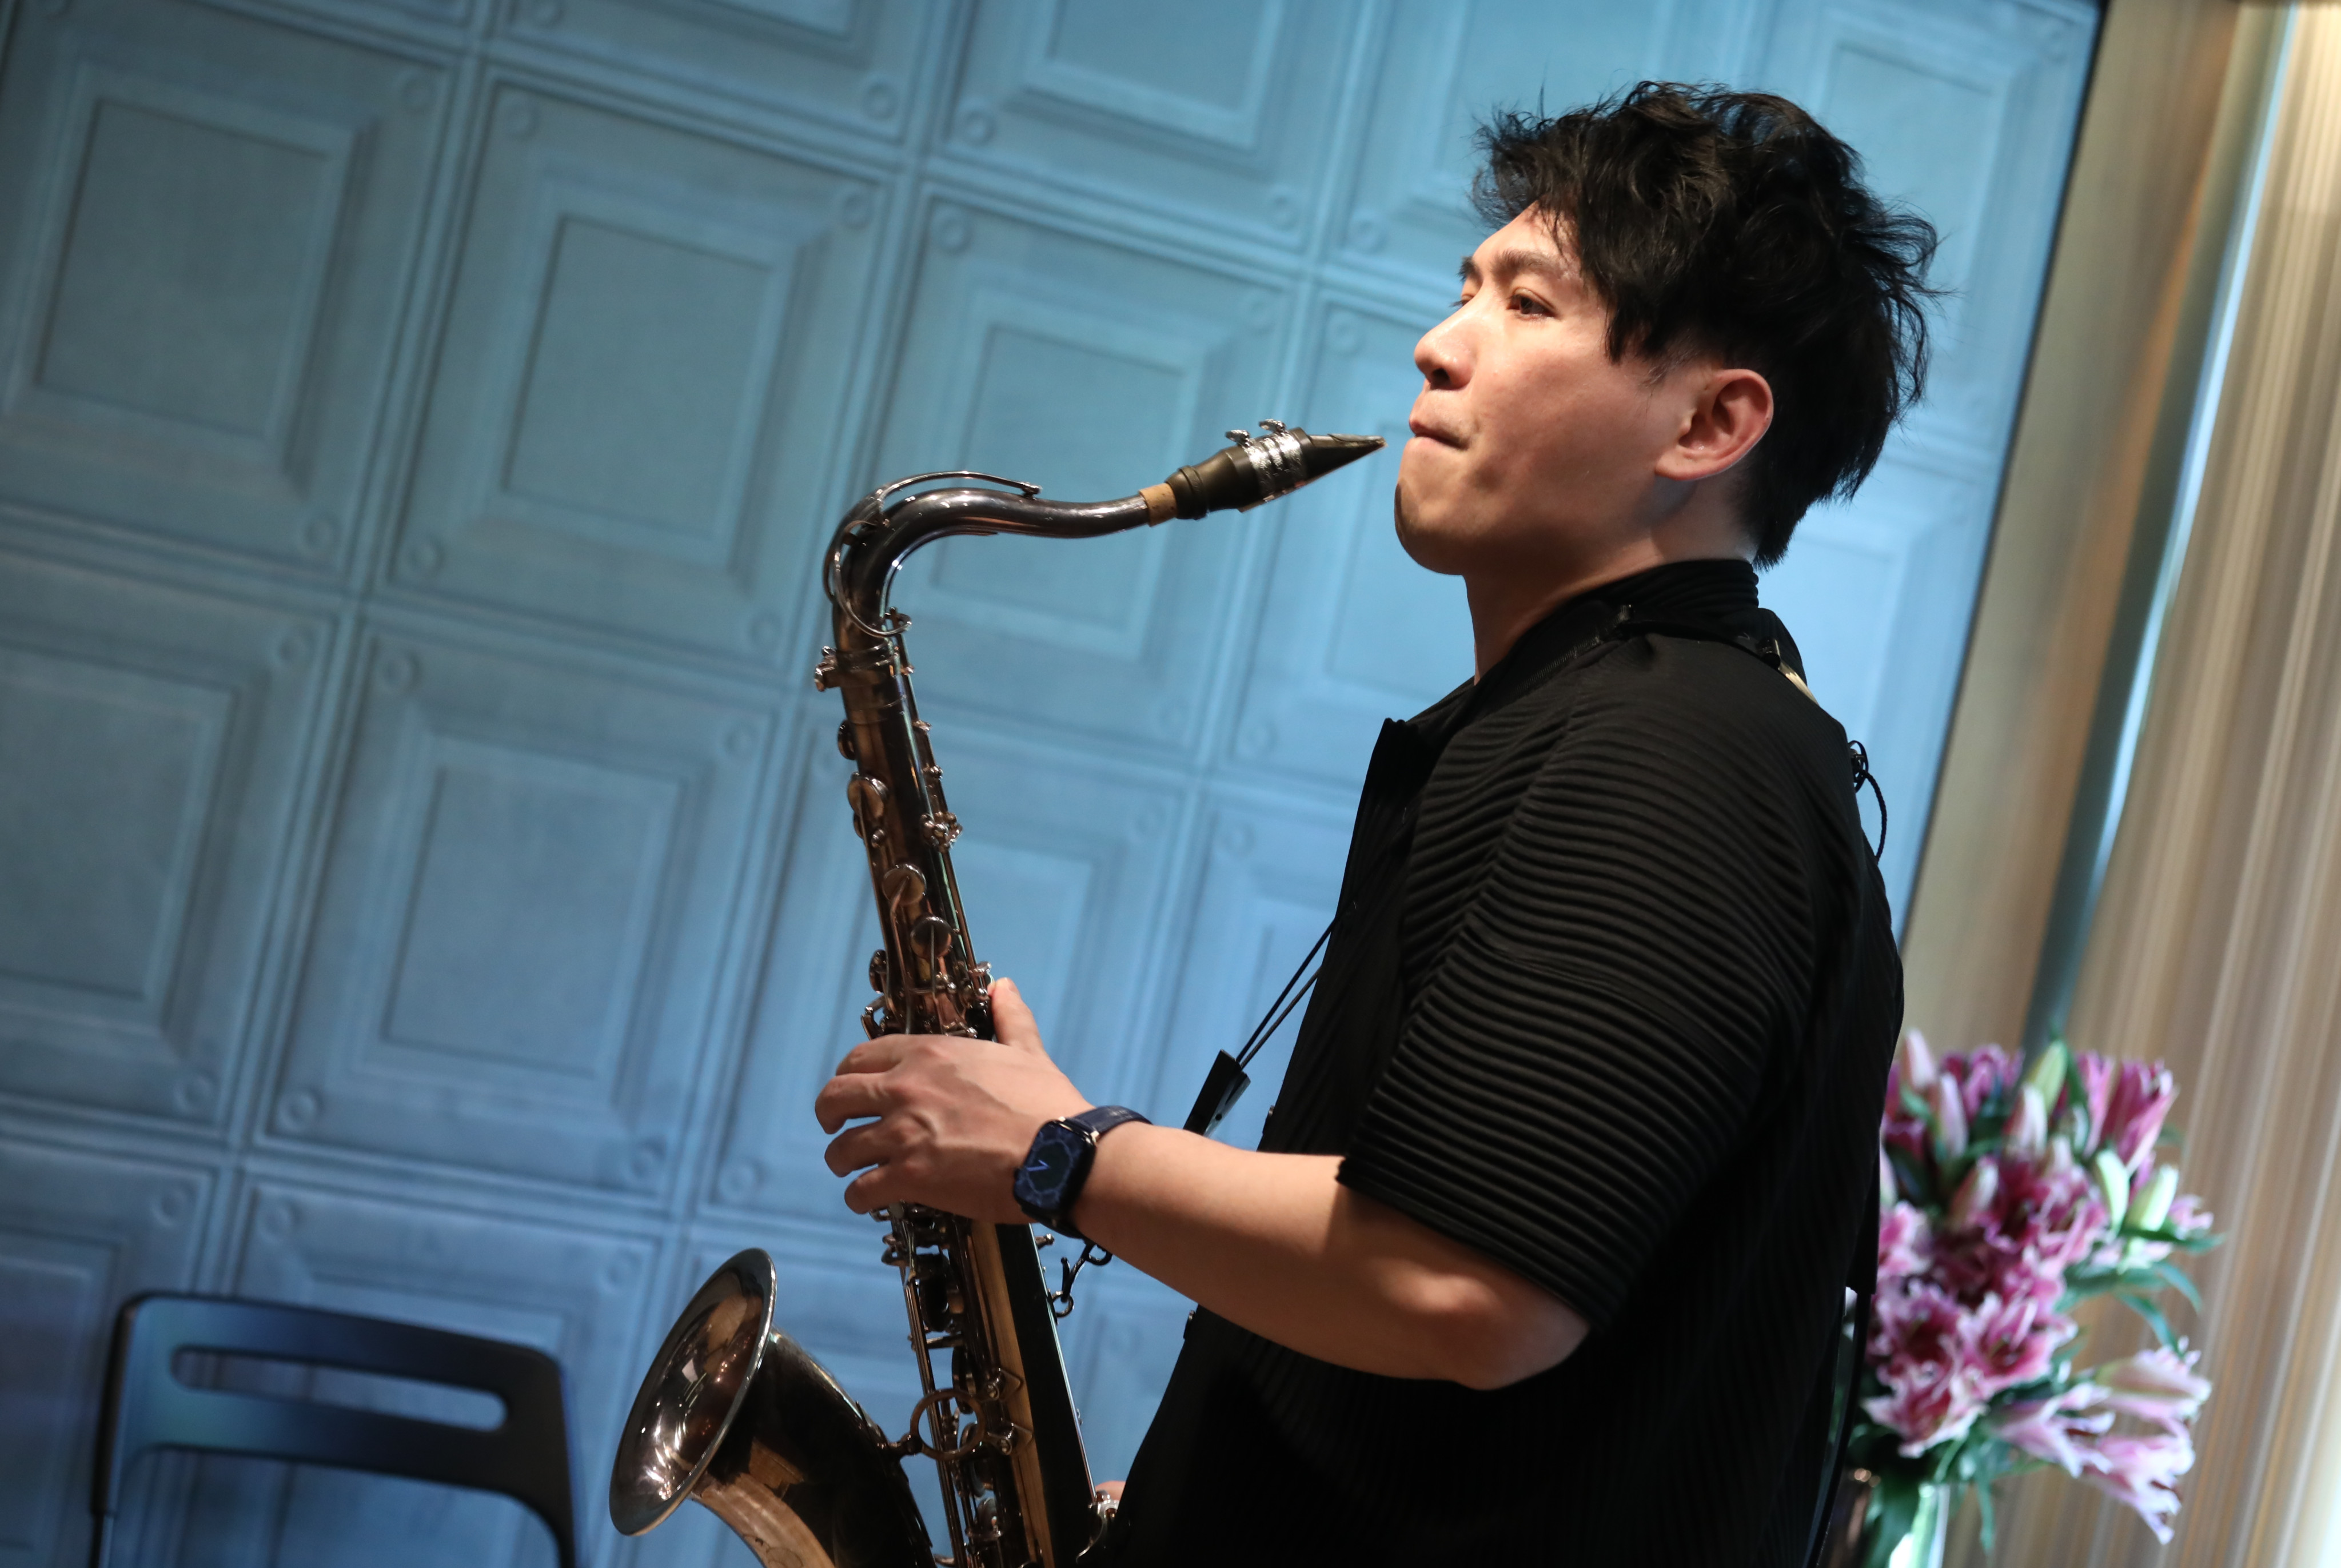 Hong Kong saxophonist Timothy Sun releases a jazz album in August featuring tunes by several young Hong Kong composers. Photo: Jonathan Wong